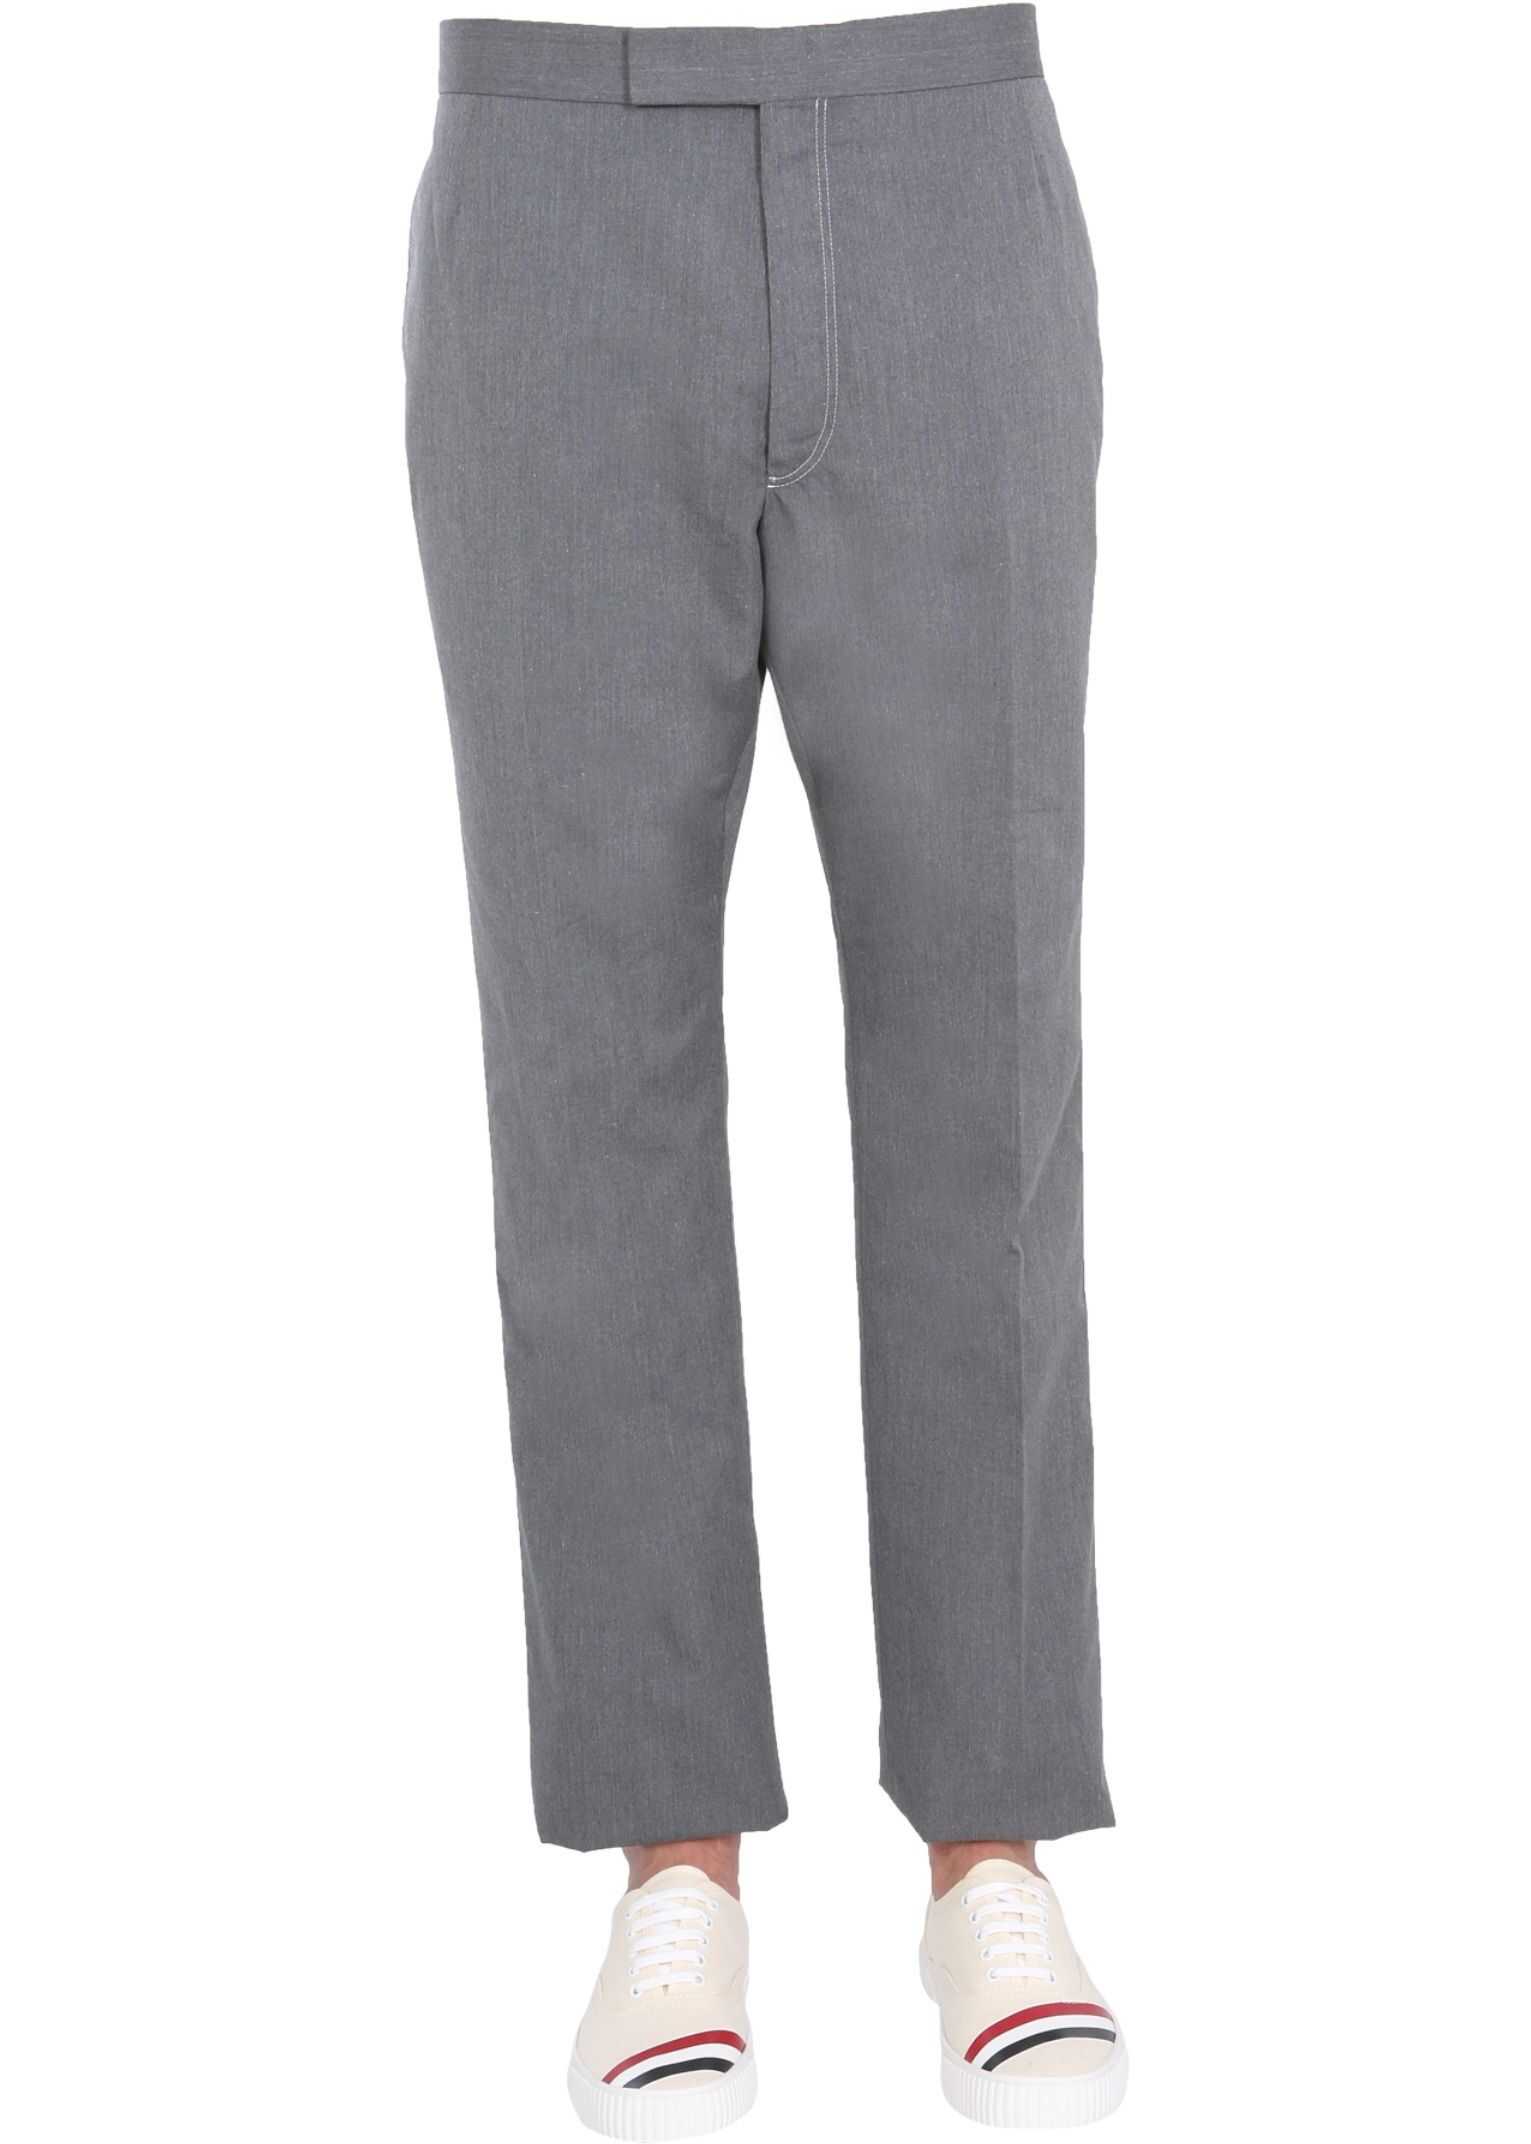 Thom Browne Trousers With Contrast Stitching MTC001G_04502035 GREY image